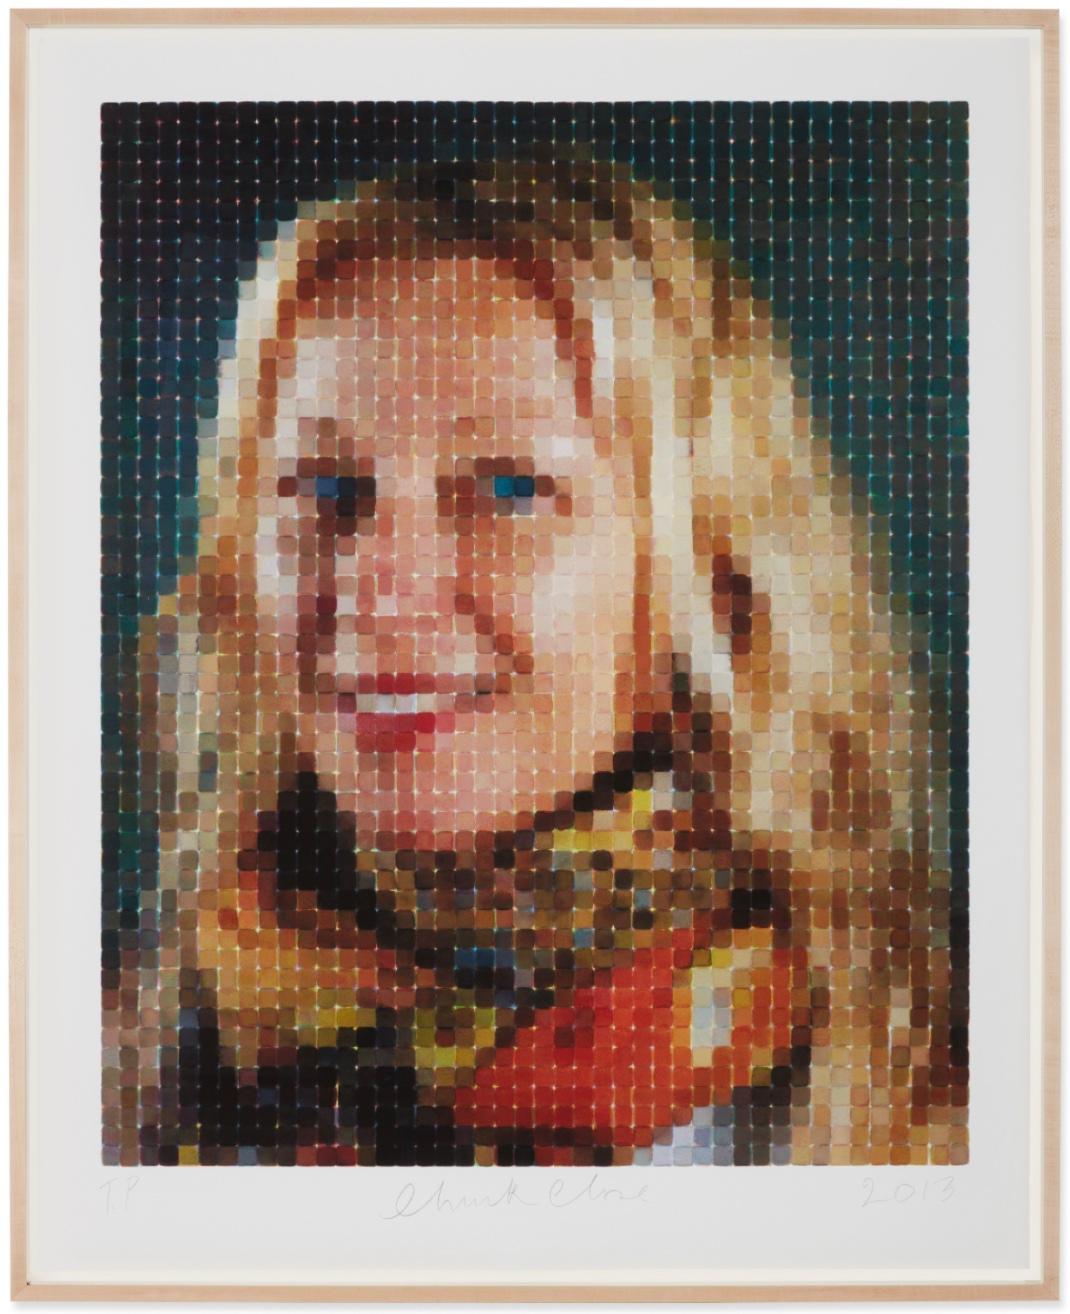 Cindy (Smile) - Print by Chuck Close